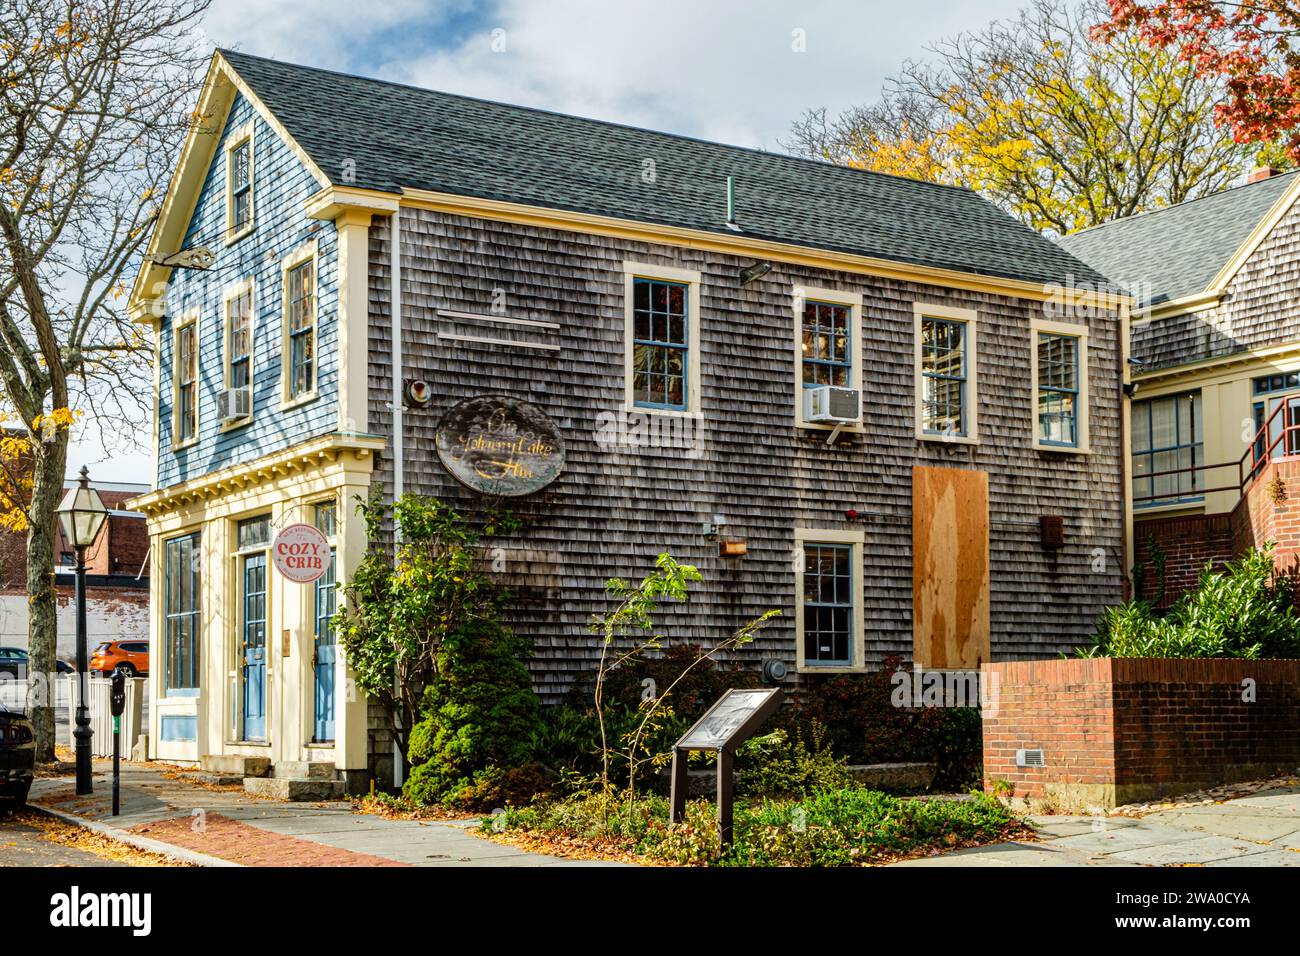 The Cozy Crib, Johnny Cake Hill, New Bedford, Massachusetts Banque D'Images